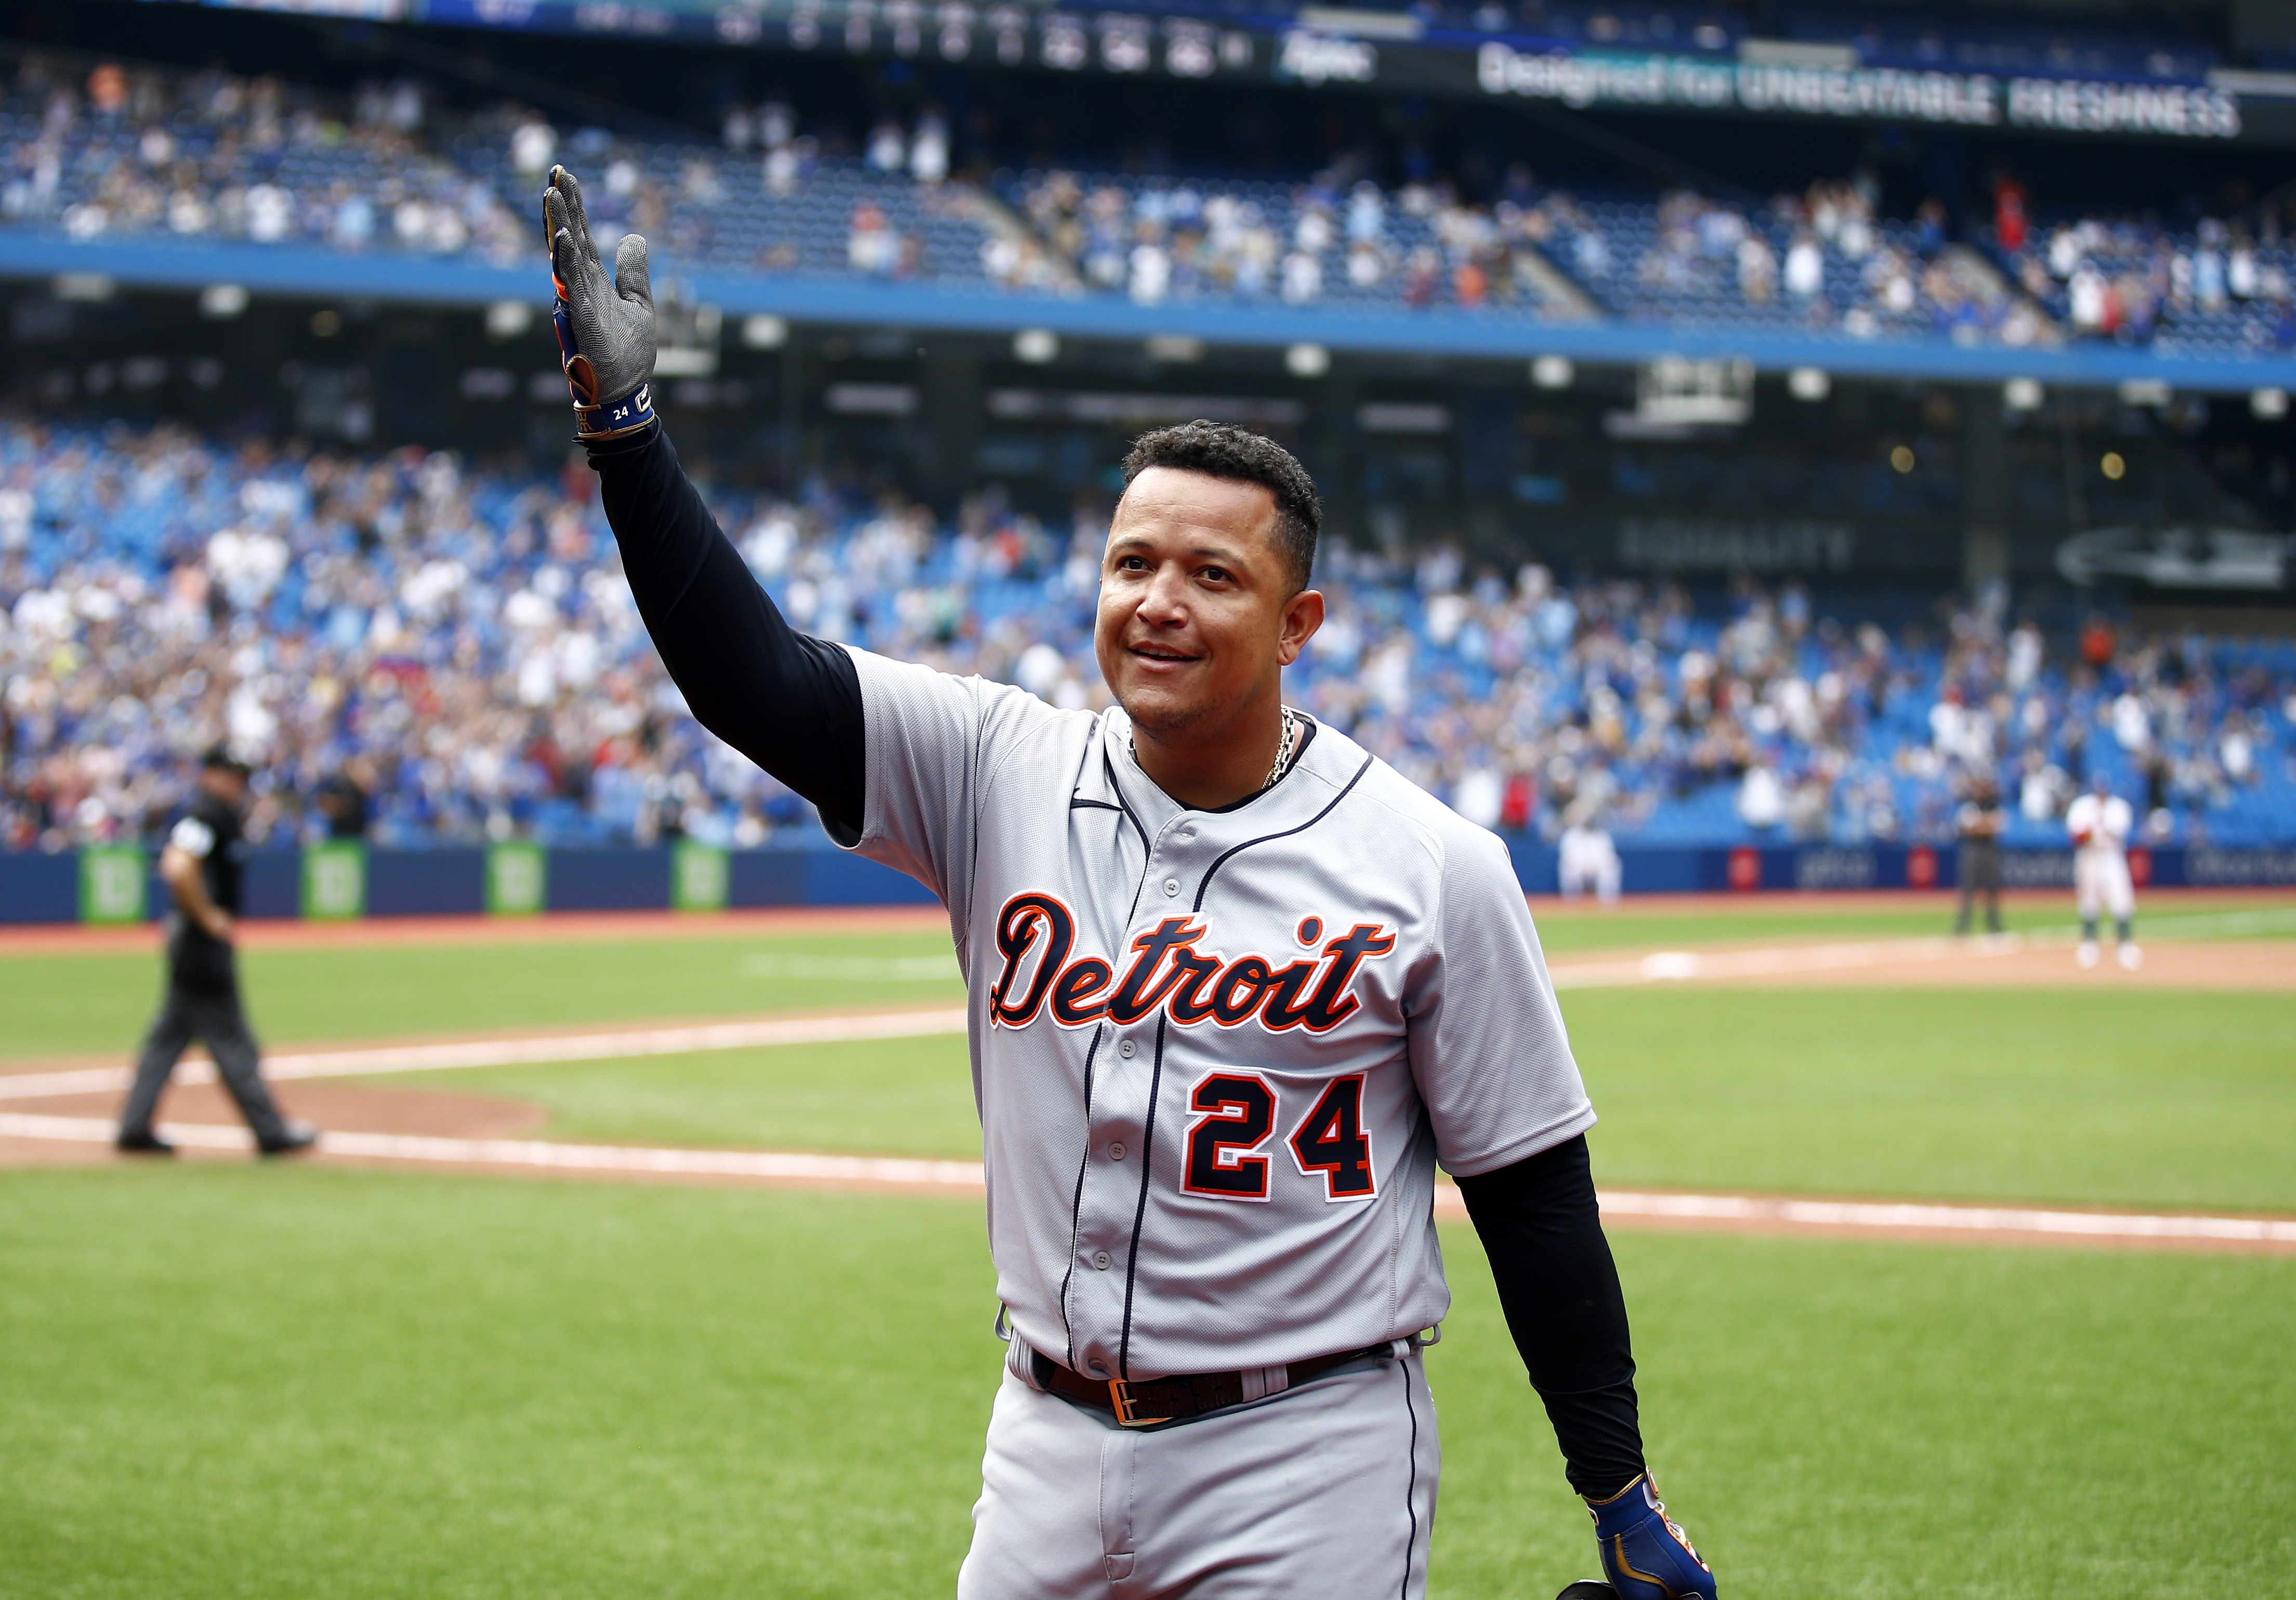 Tigers fall 6-3 to the Red Sox on Opening Day, Cabrera singles run in